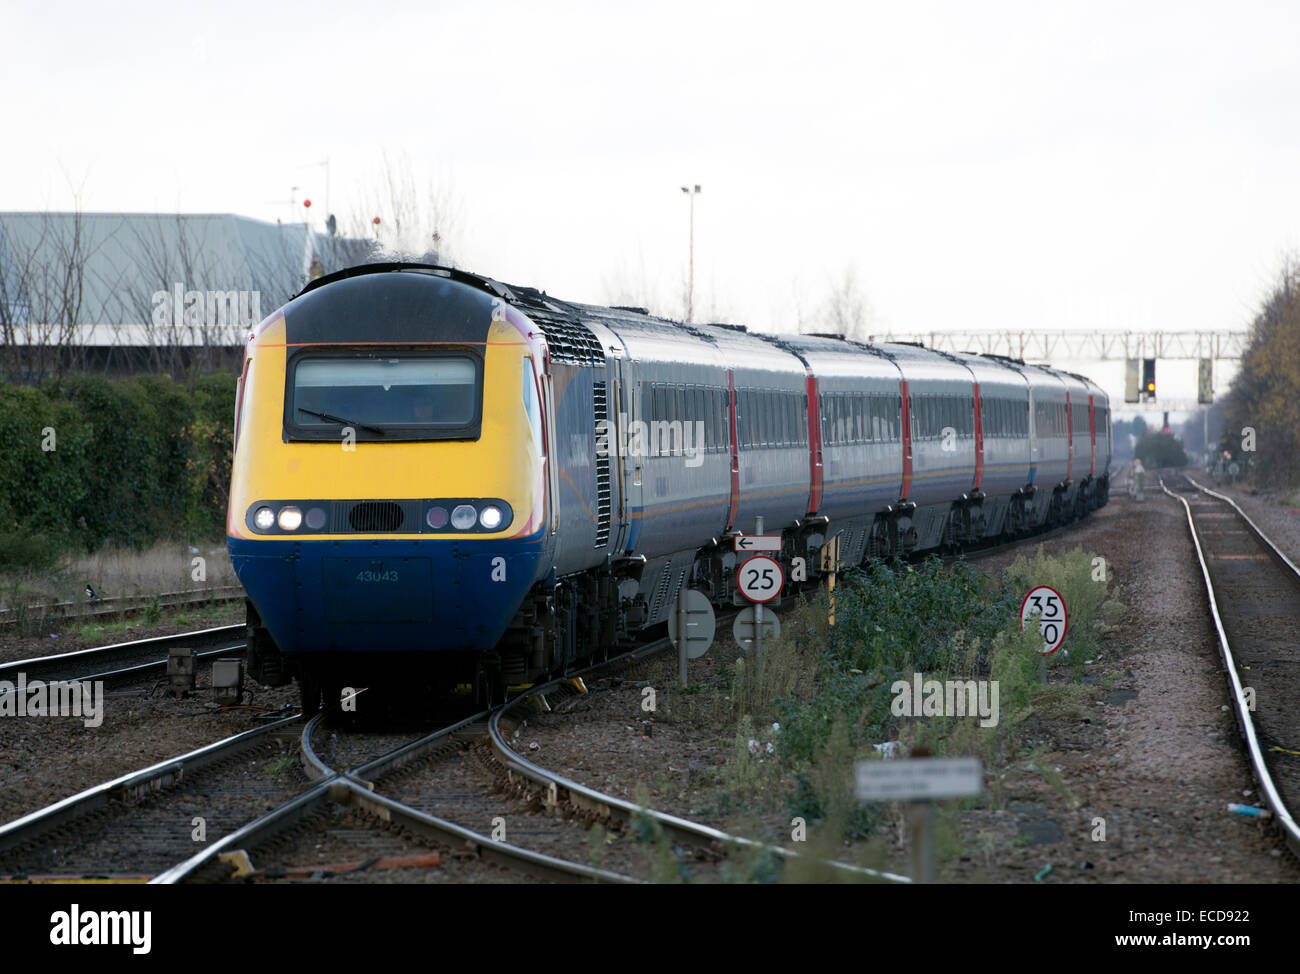 East Midlands Trains HST diesel train arriving at Leicester station, UK Stock Photo